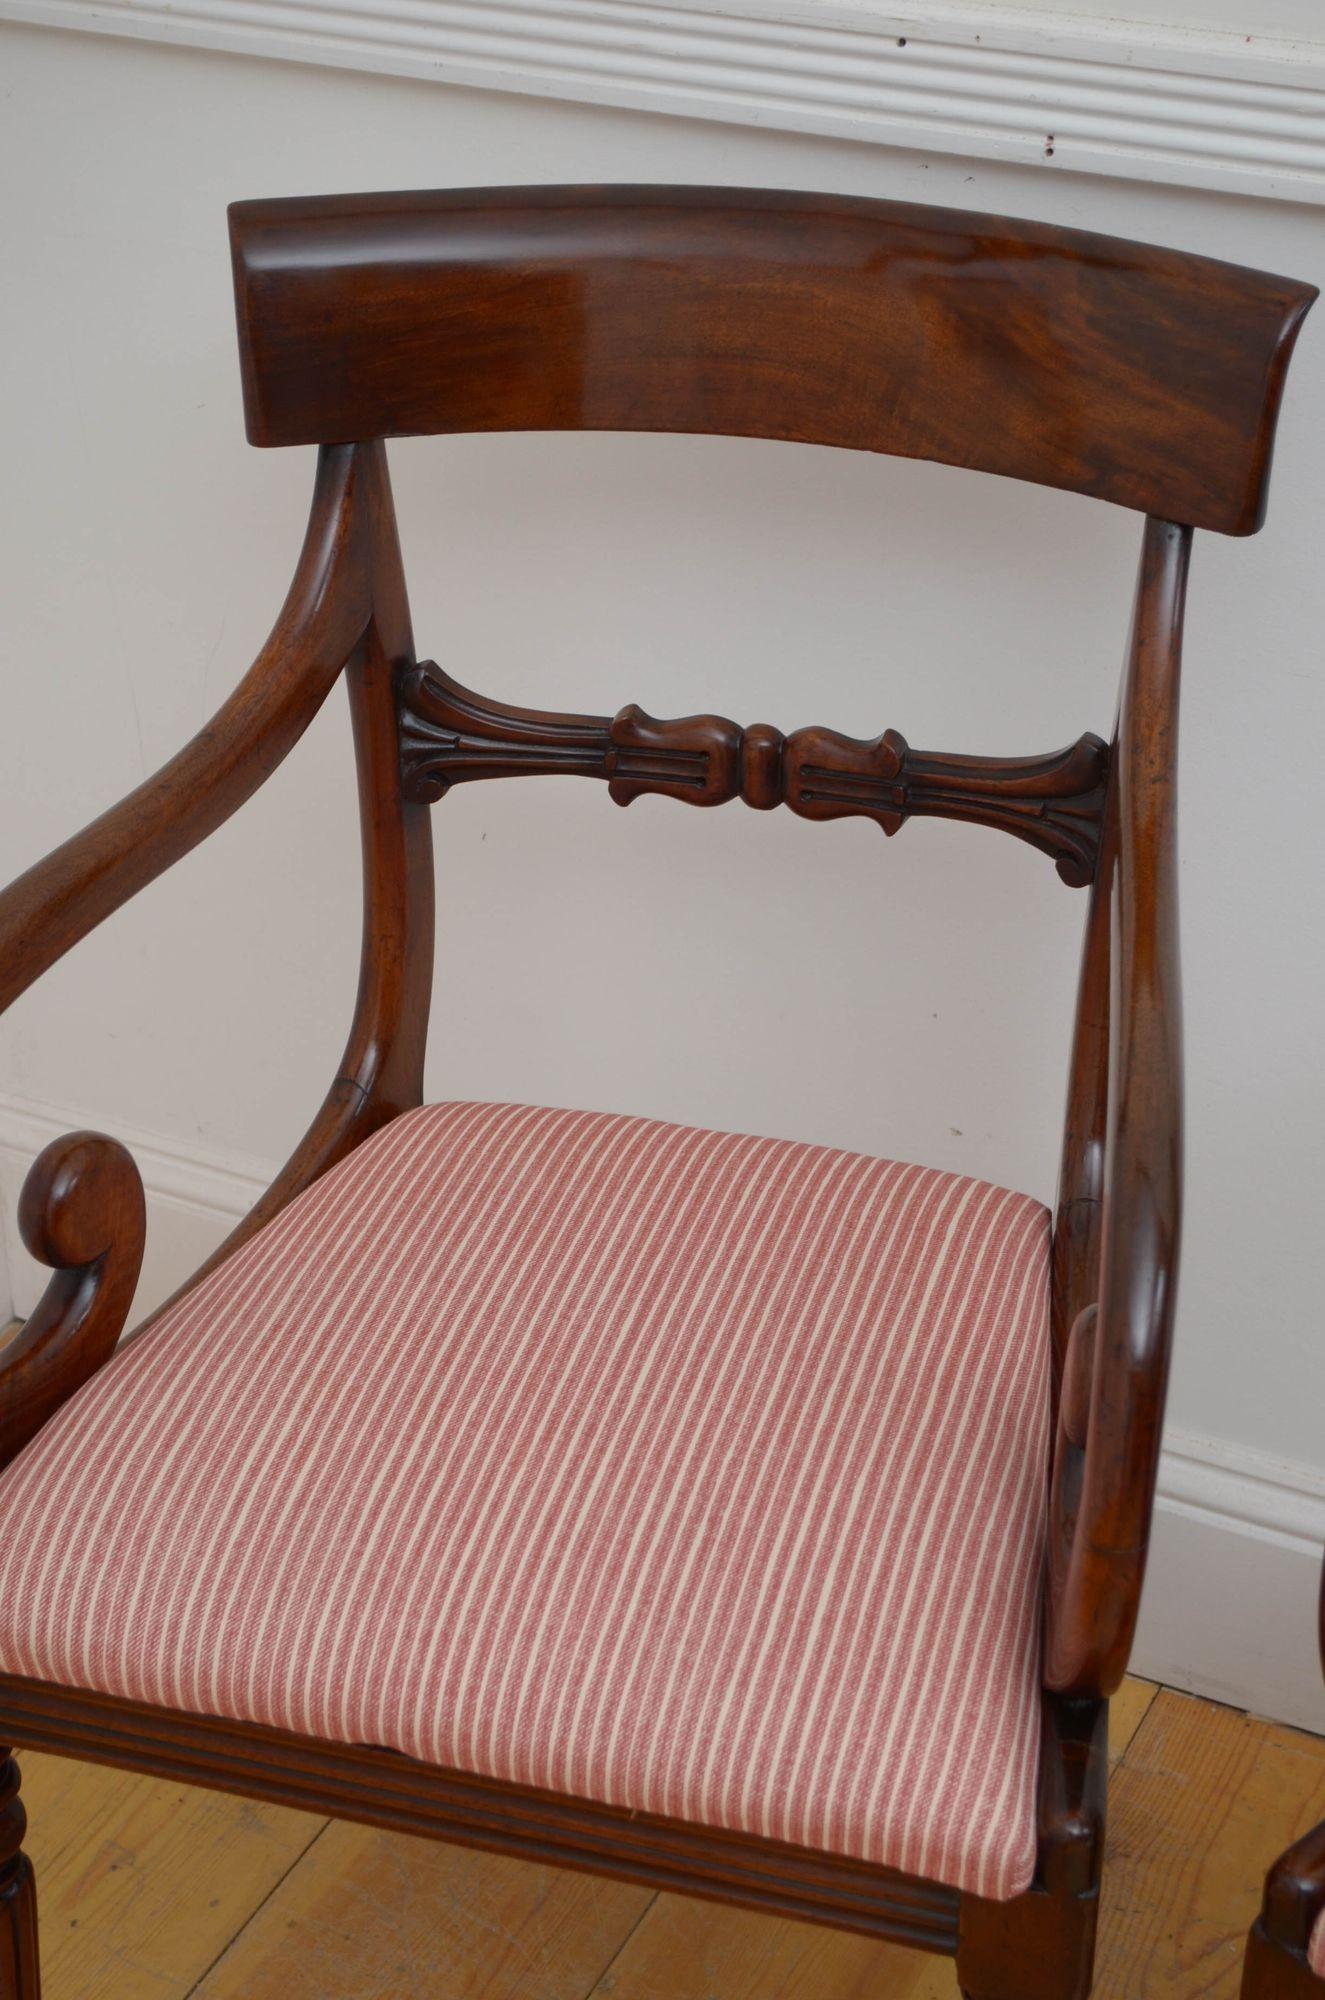 J020 Pair of antique carver chair in mahogany, each having shaped top rail above carved mid rail and drop in seat flanked by open scroll arms, all standing on turned and fluted legs. This antique pair of chairs is in home ready condition.